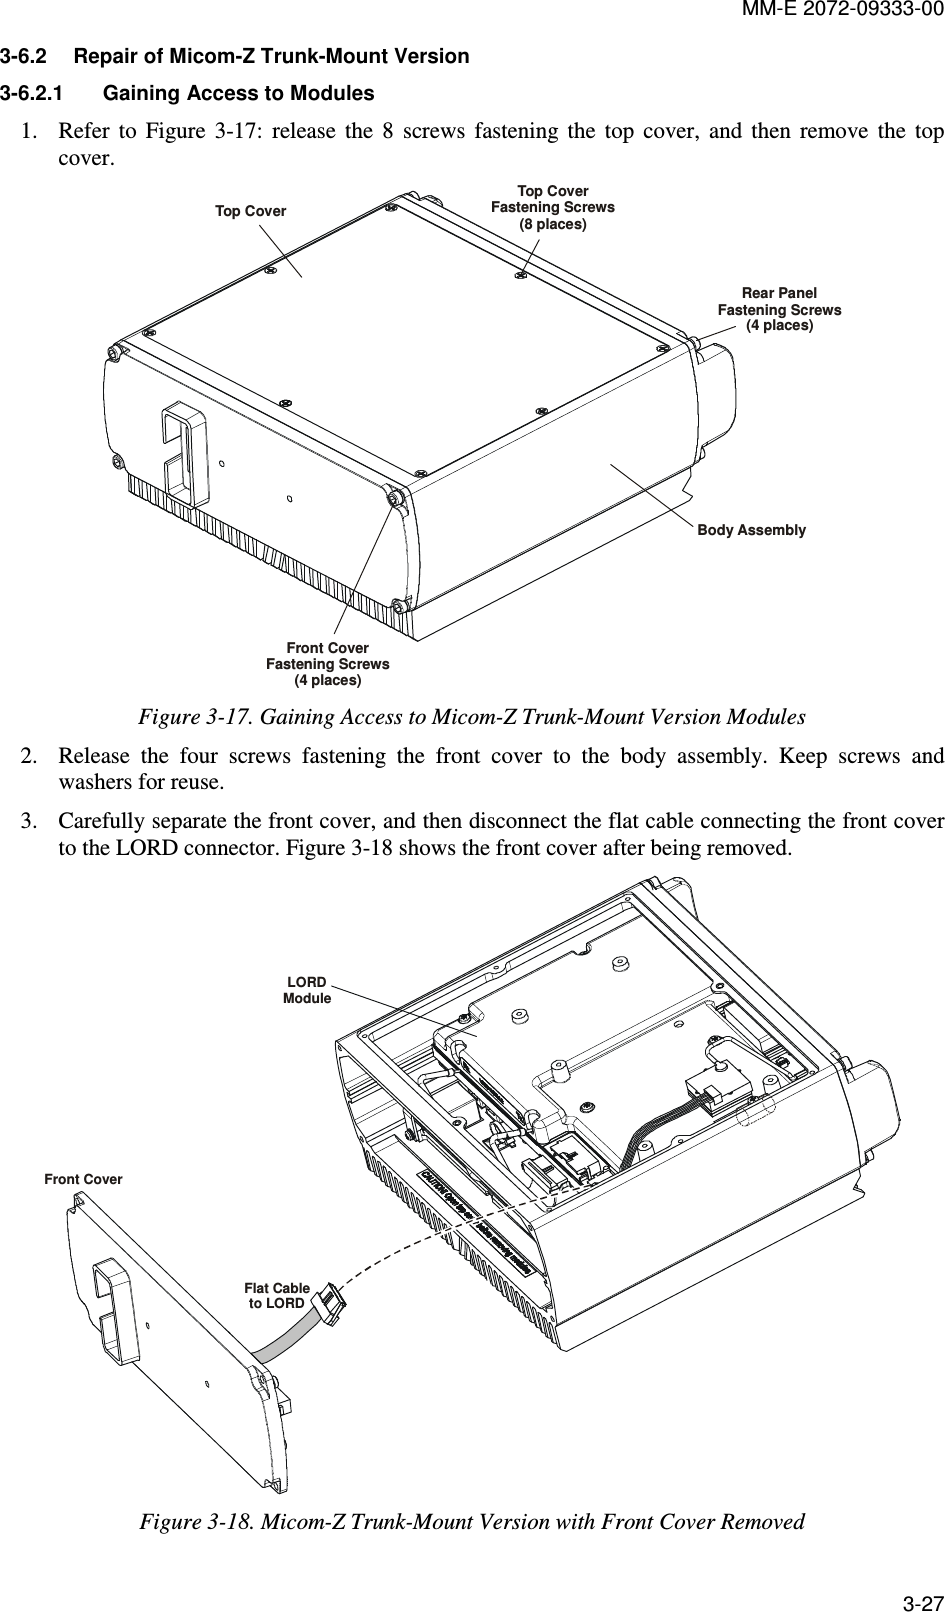 MM-E 2072-09333-00 3-27 3-6.2  Repair of Micom-Z Trunk-Mount Version 3-6.2.1  Gaining Access to Modules  1. Refer  to  Figure   3-17:  release  the  8  screws  fastening  the  top  cover,  and  then  remove  the  top cover. Top CoverTop CoverFastening Screws(8 places)Rear PanelFastening Screws(4 places)Front CoverFastening Screws(4 places)Body Assembly Figure  3-17. Gaining Access to Micom-Z Trunk-Mount Version Modules 2. Release  the  four  screws  fastening  the  front  cover  to  the  body  assembly.  Keep  screws  and washers for reuse. 3. Carefully separate the front cover, and then disconnect the flat cable connecting the front cover to the LORD connector. Figure  3-18 shows the front cover after being removed. LORDModuleFlat Cableto LORDFront Cover Figure  3-18. Micom-Z Trunk-Mount Version with Front Cover Removed 